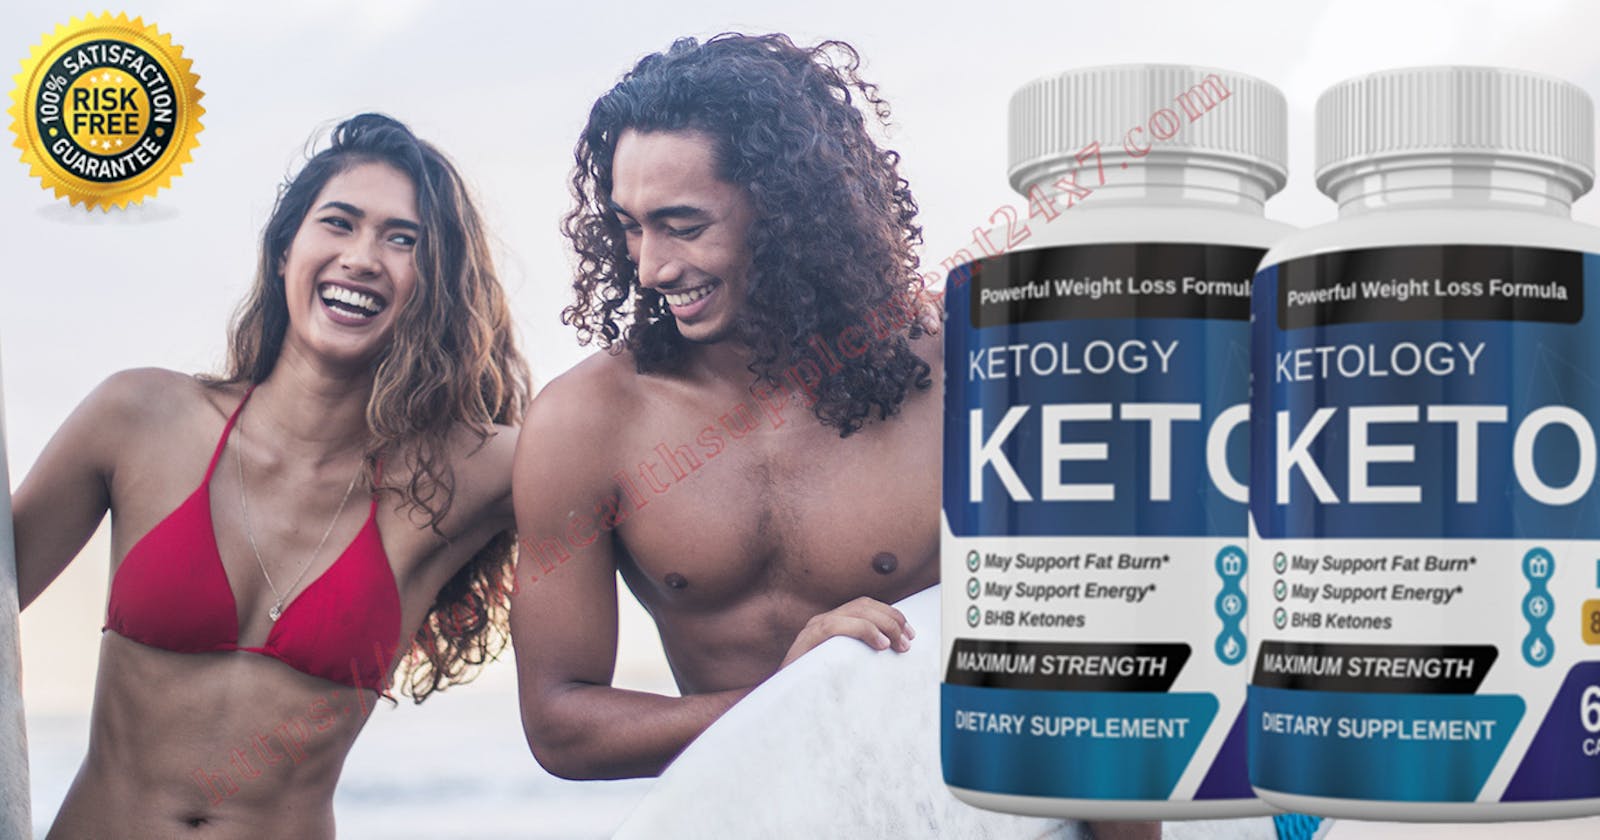 Ketology Keto #1 Powerful Weight Lose Supplement For Burn Fat for Energy not Carbs | Increase Energy Naturally[Spam Or Legit]